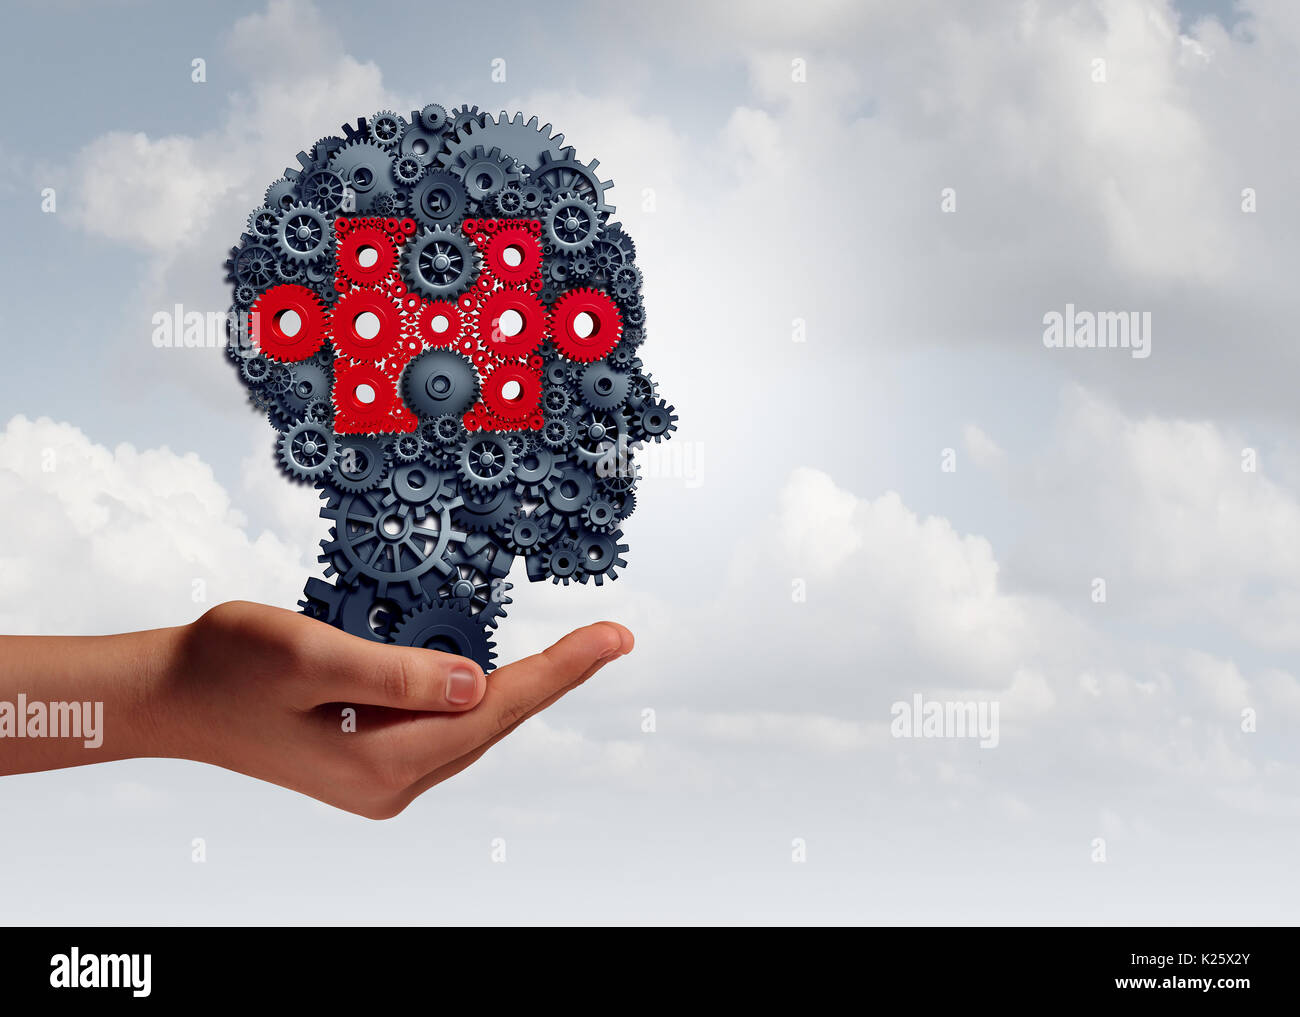 Business skills training and corporate learning concept as a hand holding a group of gear objects shaped as a human head with a jigsaw puzzle. Stock Photo